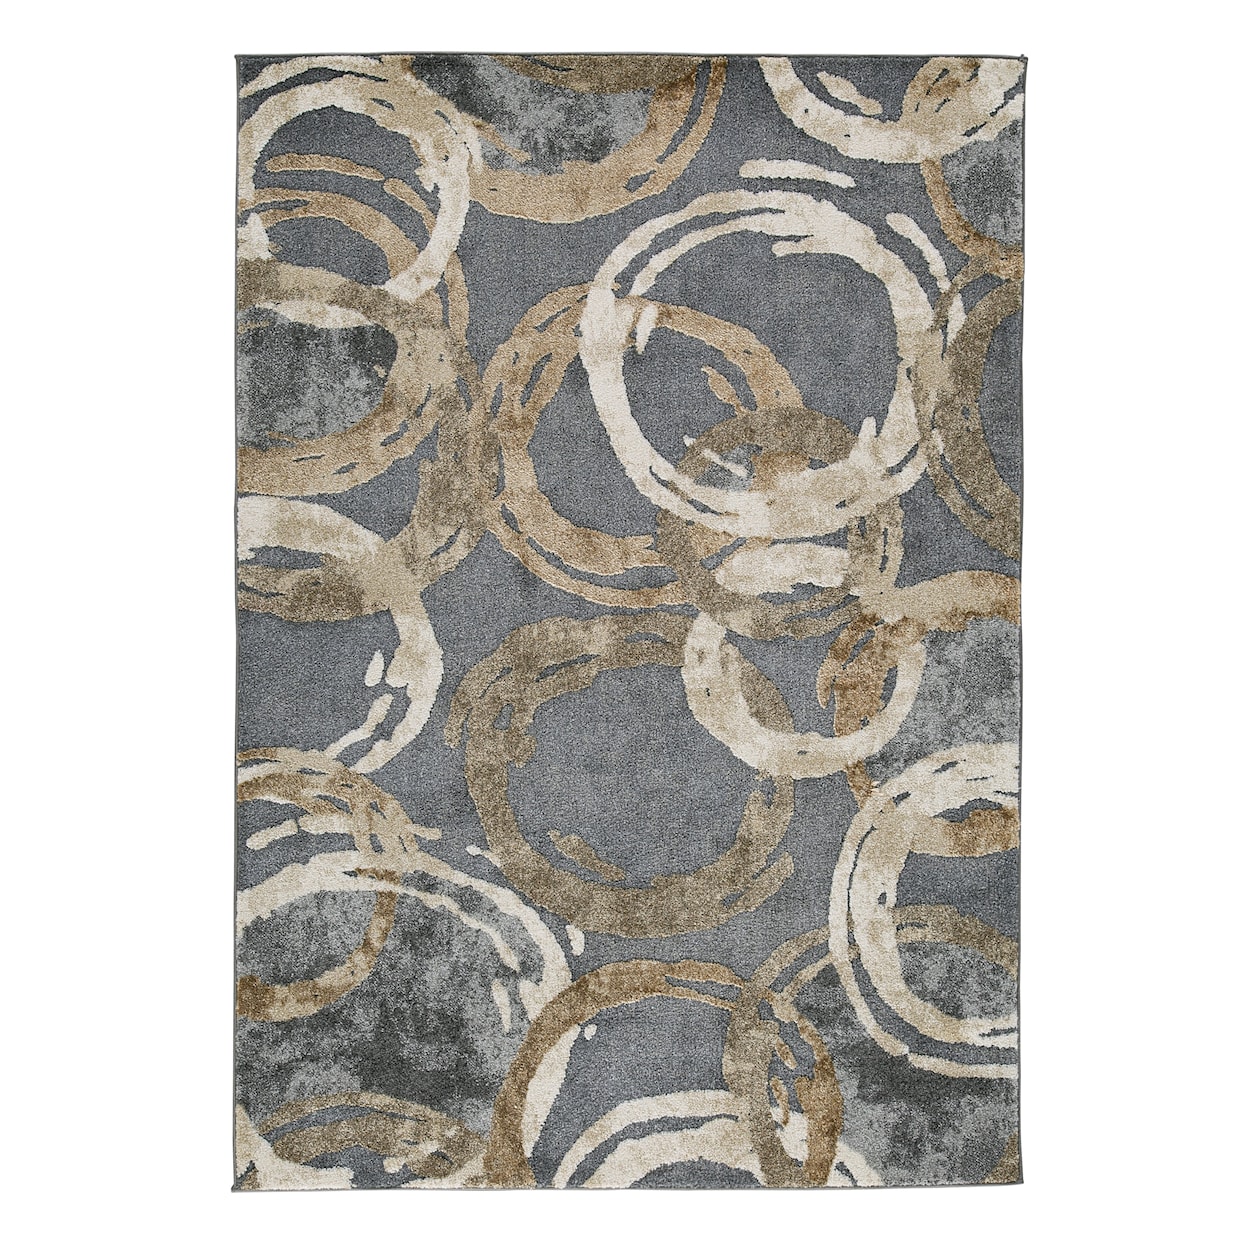 Michael Alan Select Contemporary Area Rugs Faelyn Large Rug